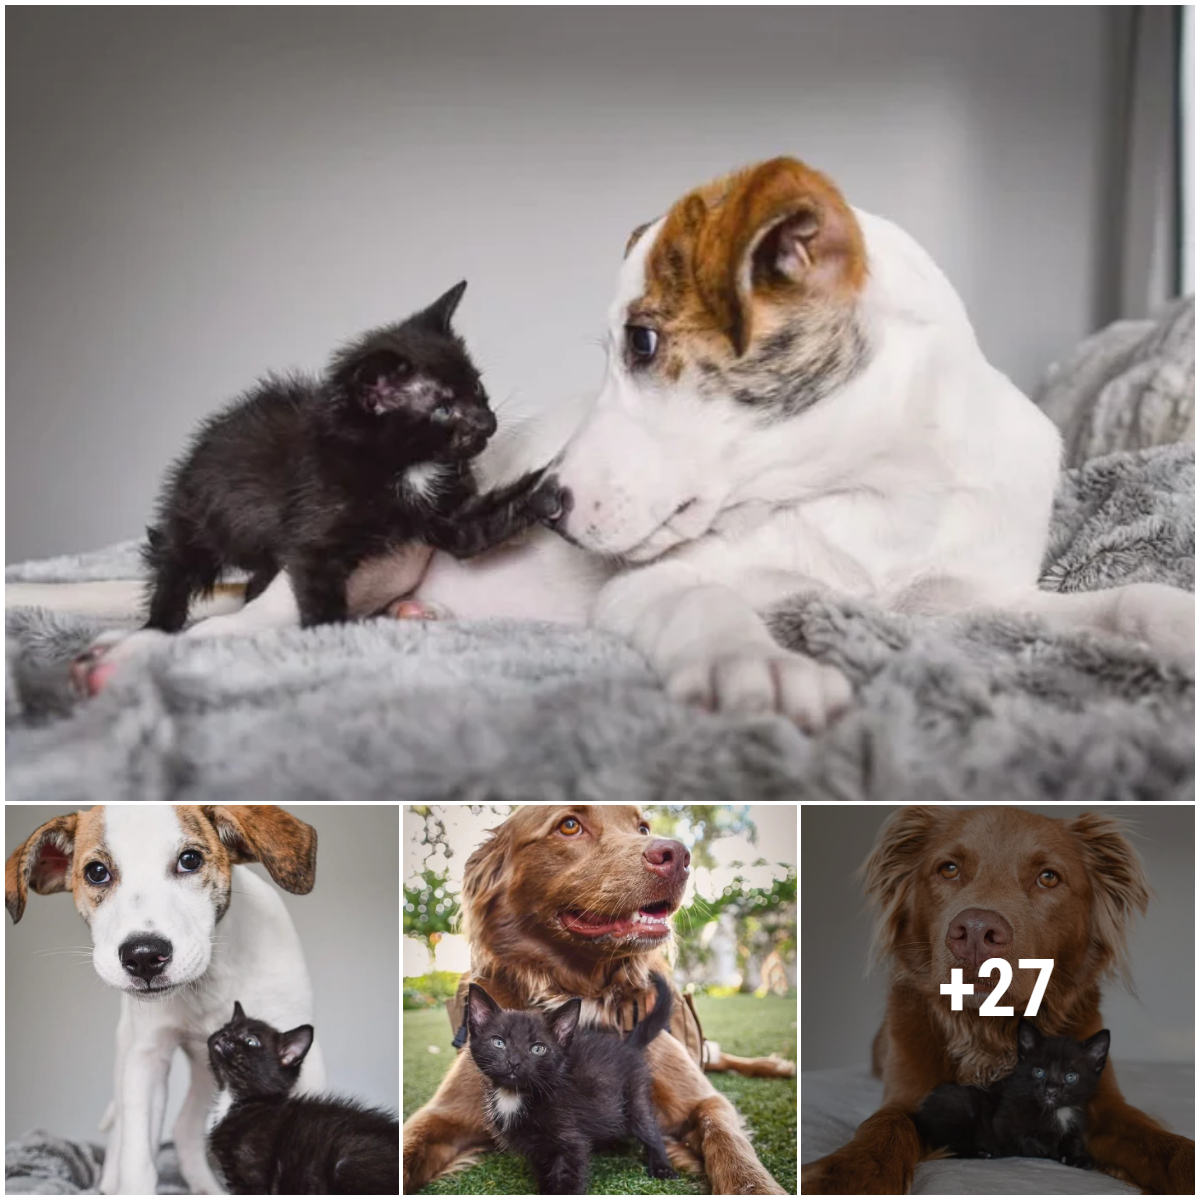 The kittens and resident dog quickly became best friends, a relationship that touched many people